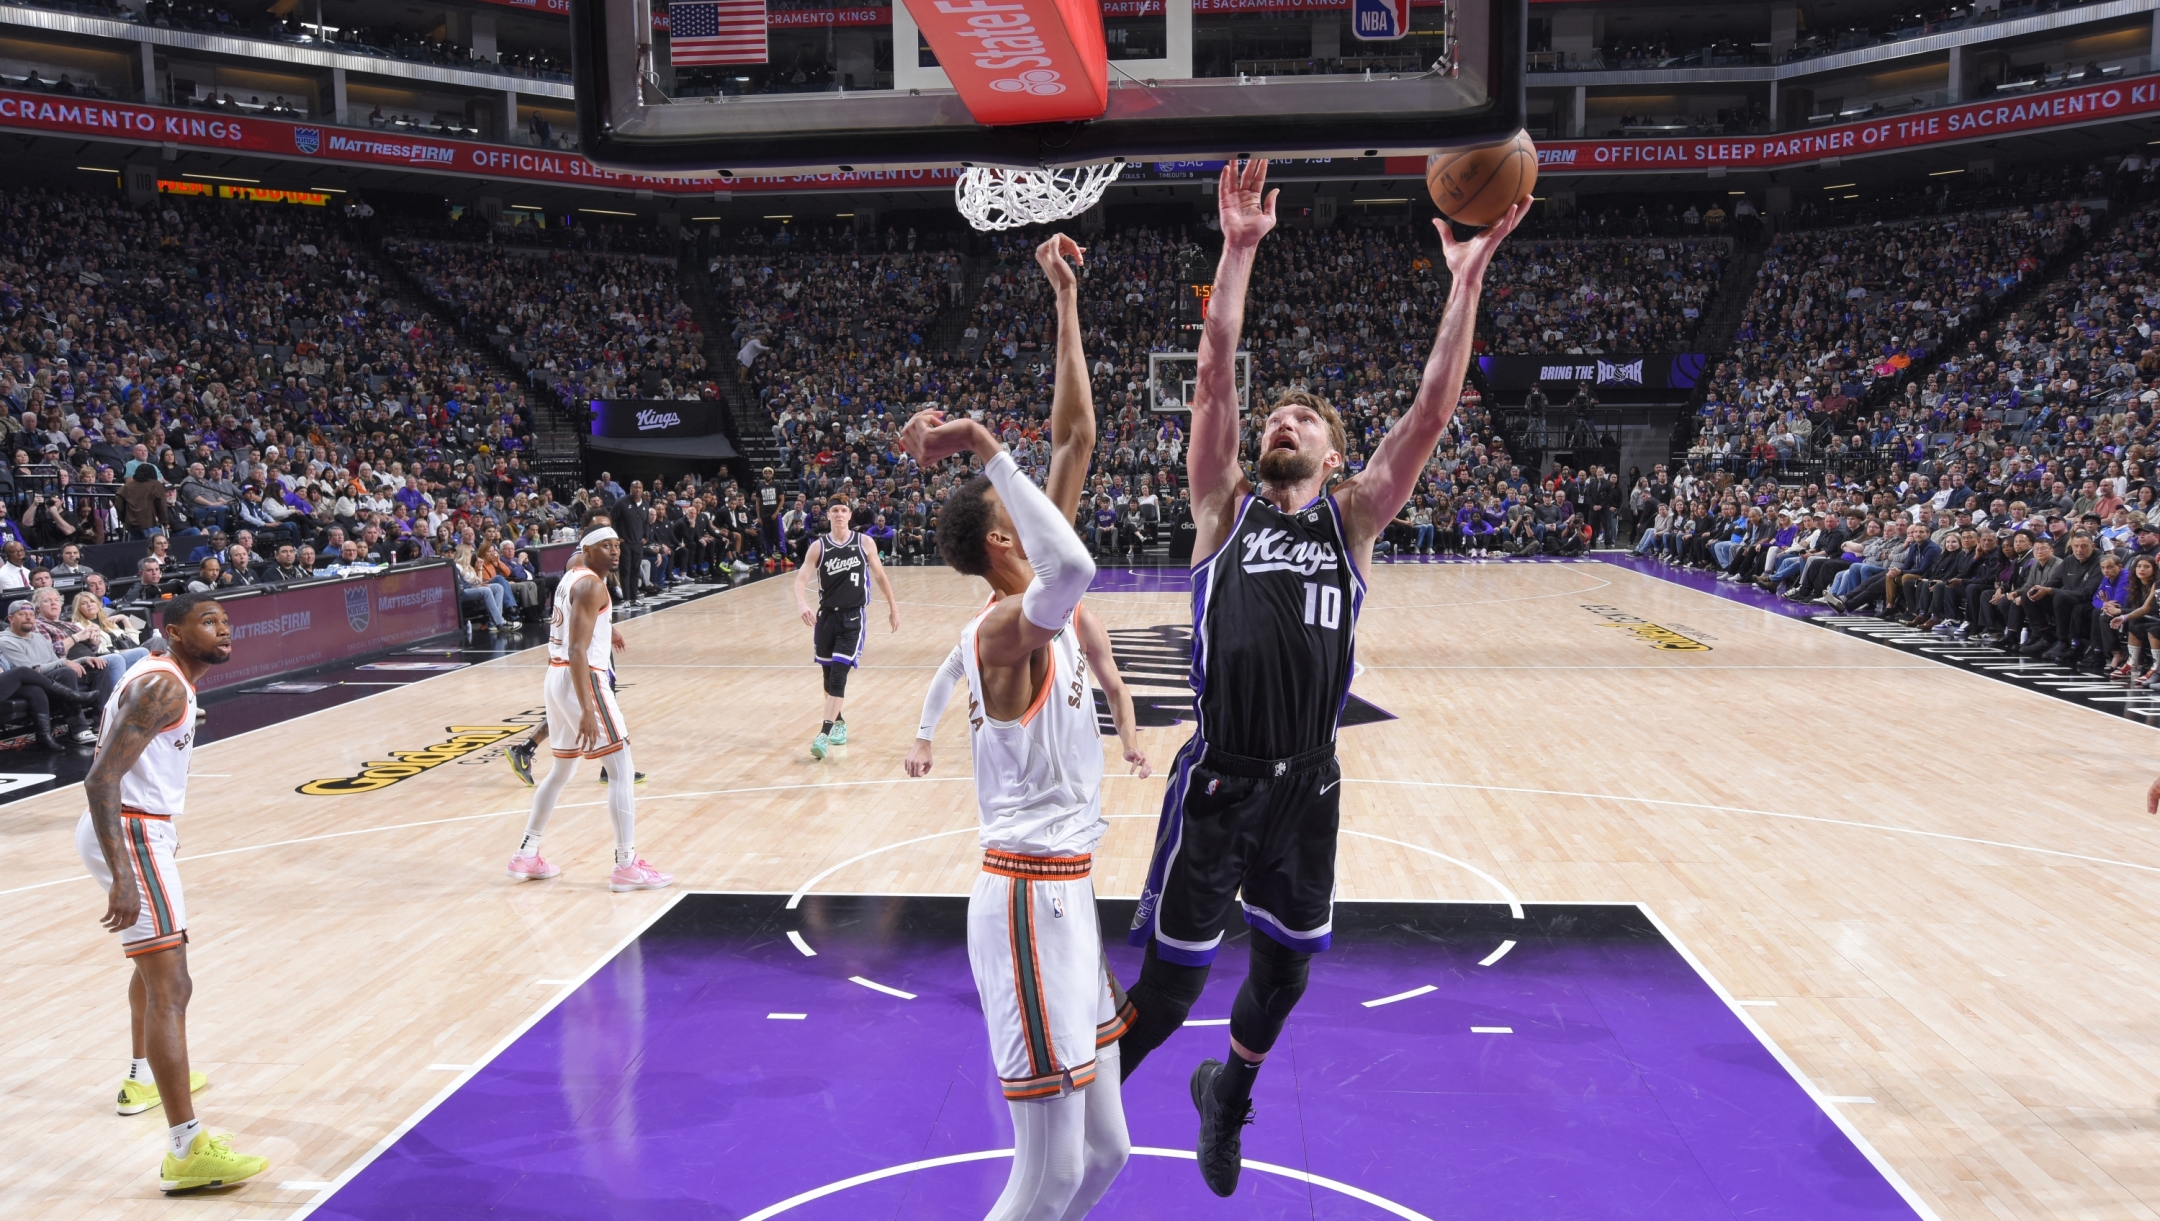 SACRAMENTO, CA - FEBRUARY 22: Domantas Sabonis #10 of the Sacramento Kings drives to the basket during the game against the San Antonio Spurs on February 22, 2024 at Golden 1 Center in Sacramento, California. NOTE TO USER: User expressly acknowledges and agrees that, by downloading and or using this Photograph, user is consenting to the terms and conditions of the Getty Images License Agreement. Mandatory Copyright Notice: Copyright 2023 NBAE   Rocky Widner/NBAE via Getty Images/AFP (Photo by ROCKY WIDNER / NBAE / Getty Images / Getty Images via AFP)